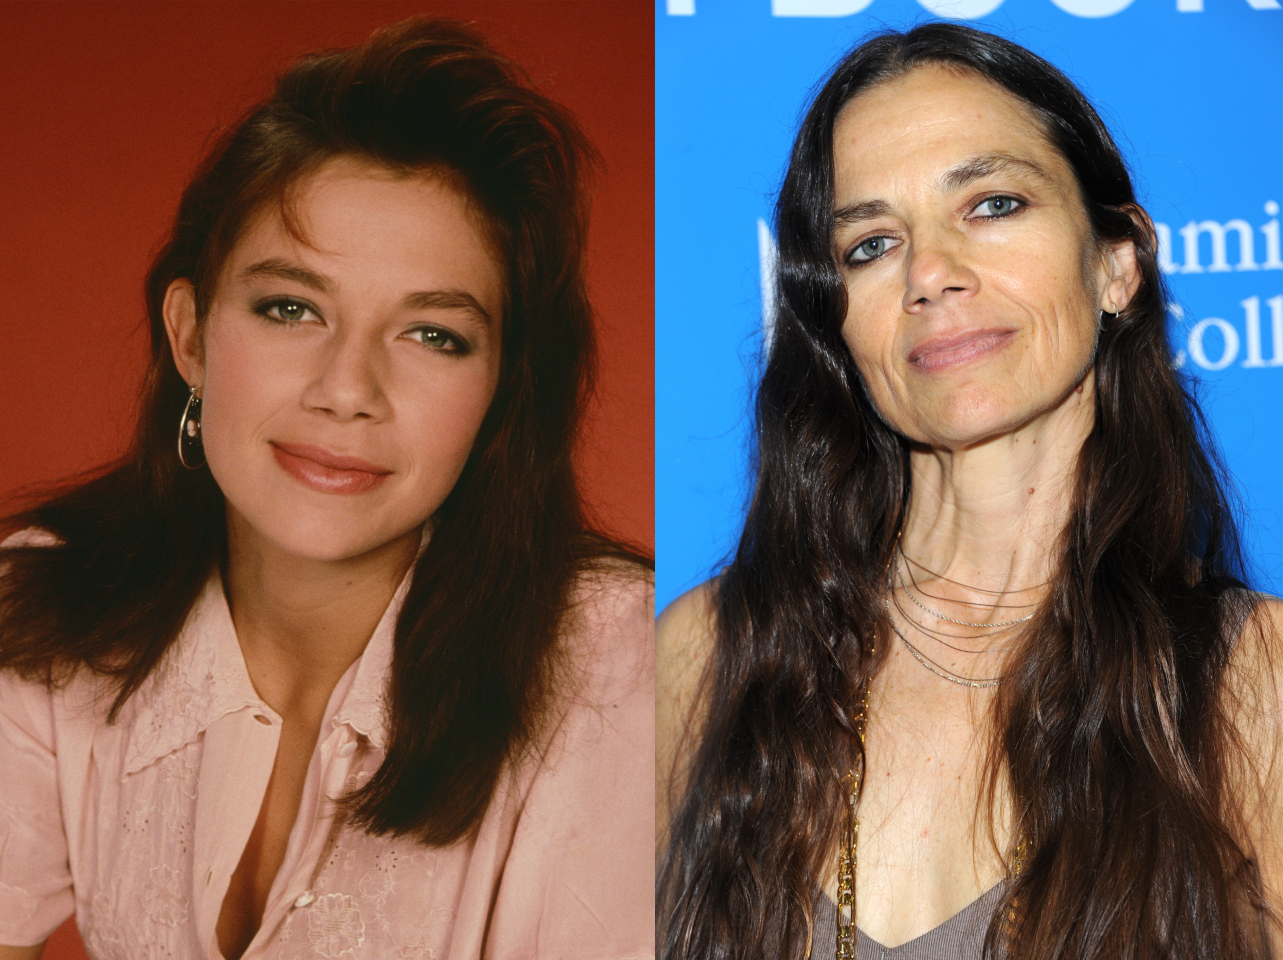 Photo comparison of Justine Bateman, then and now | Source: Getty Images